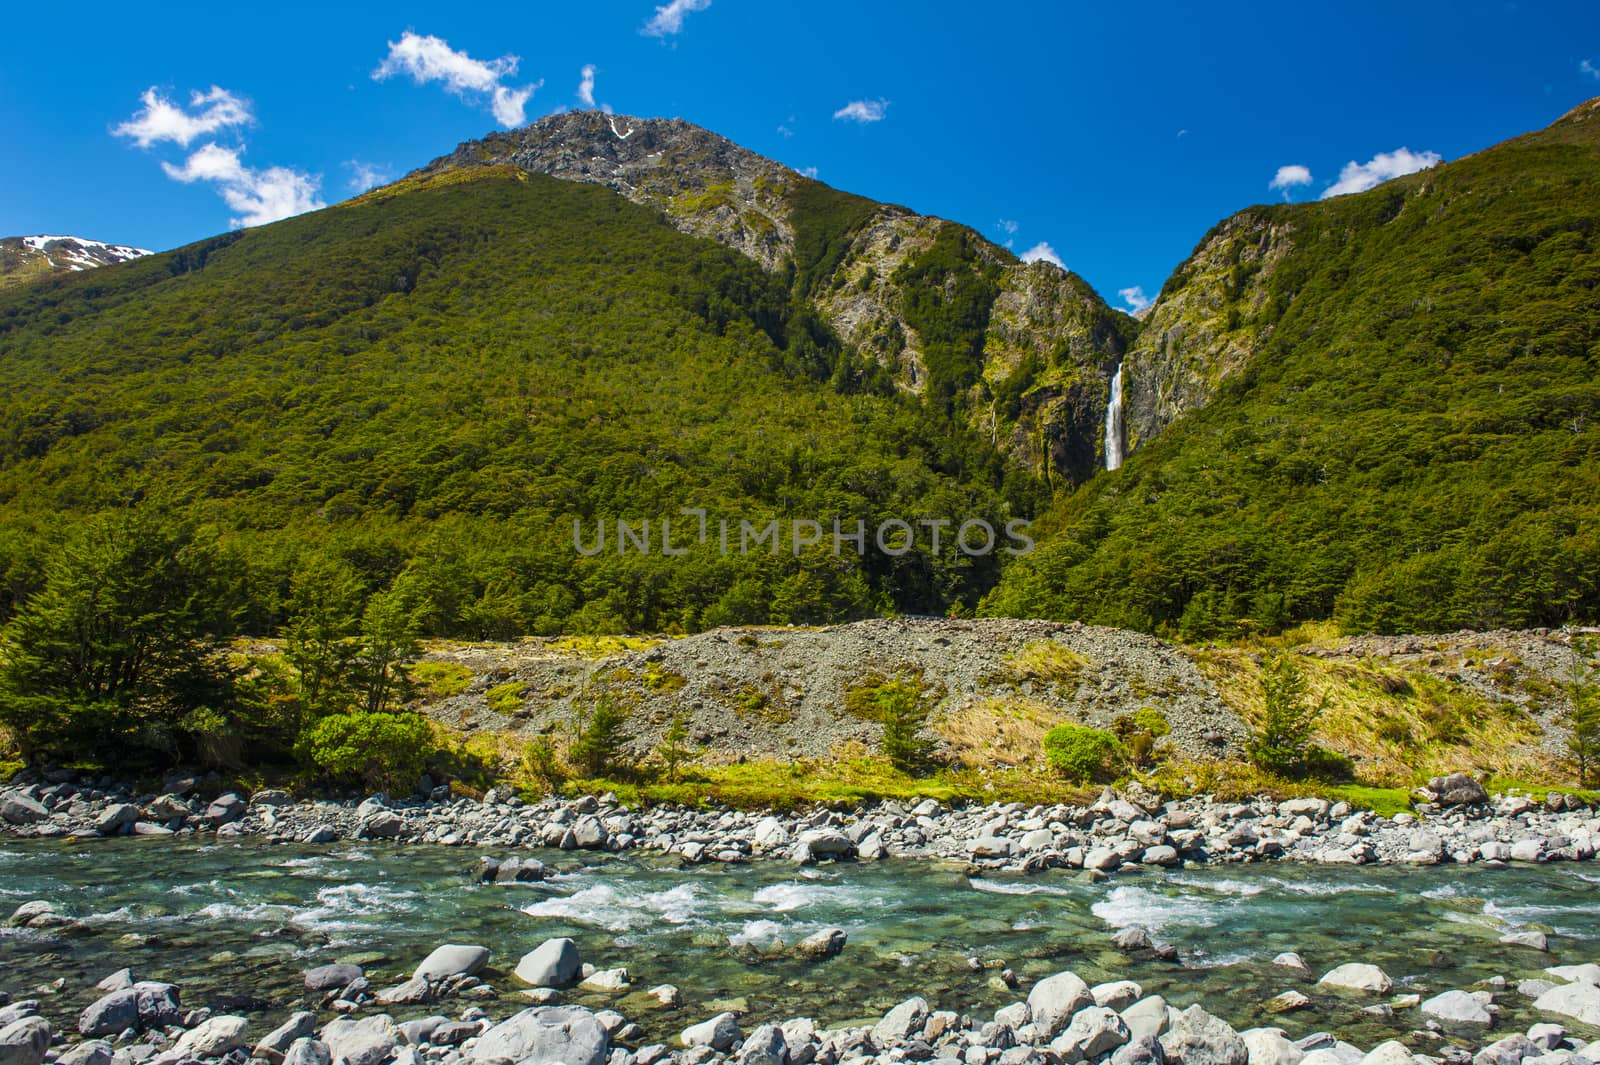 Bealey River in front and Devil's Punchbowl Waterfall in the back could be found in the Arthur's Pass National Park, New Zealand